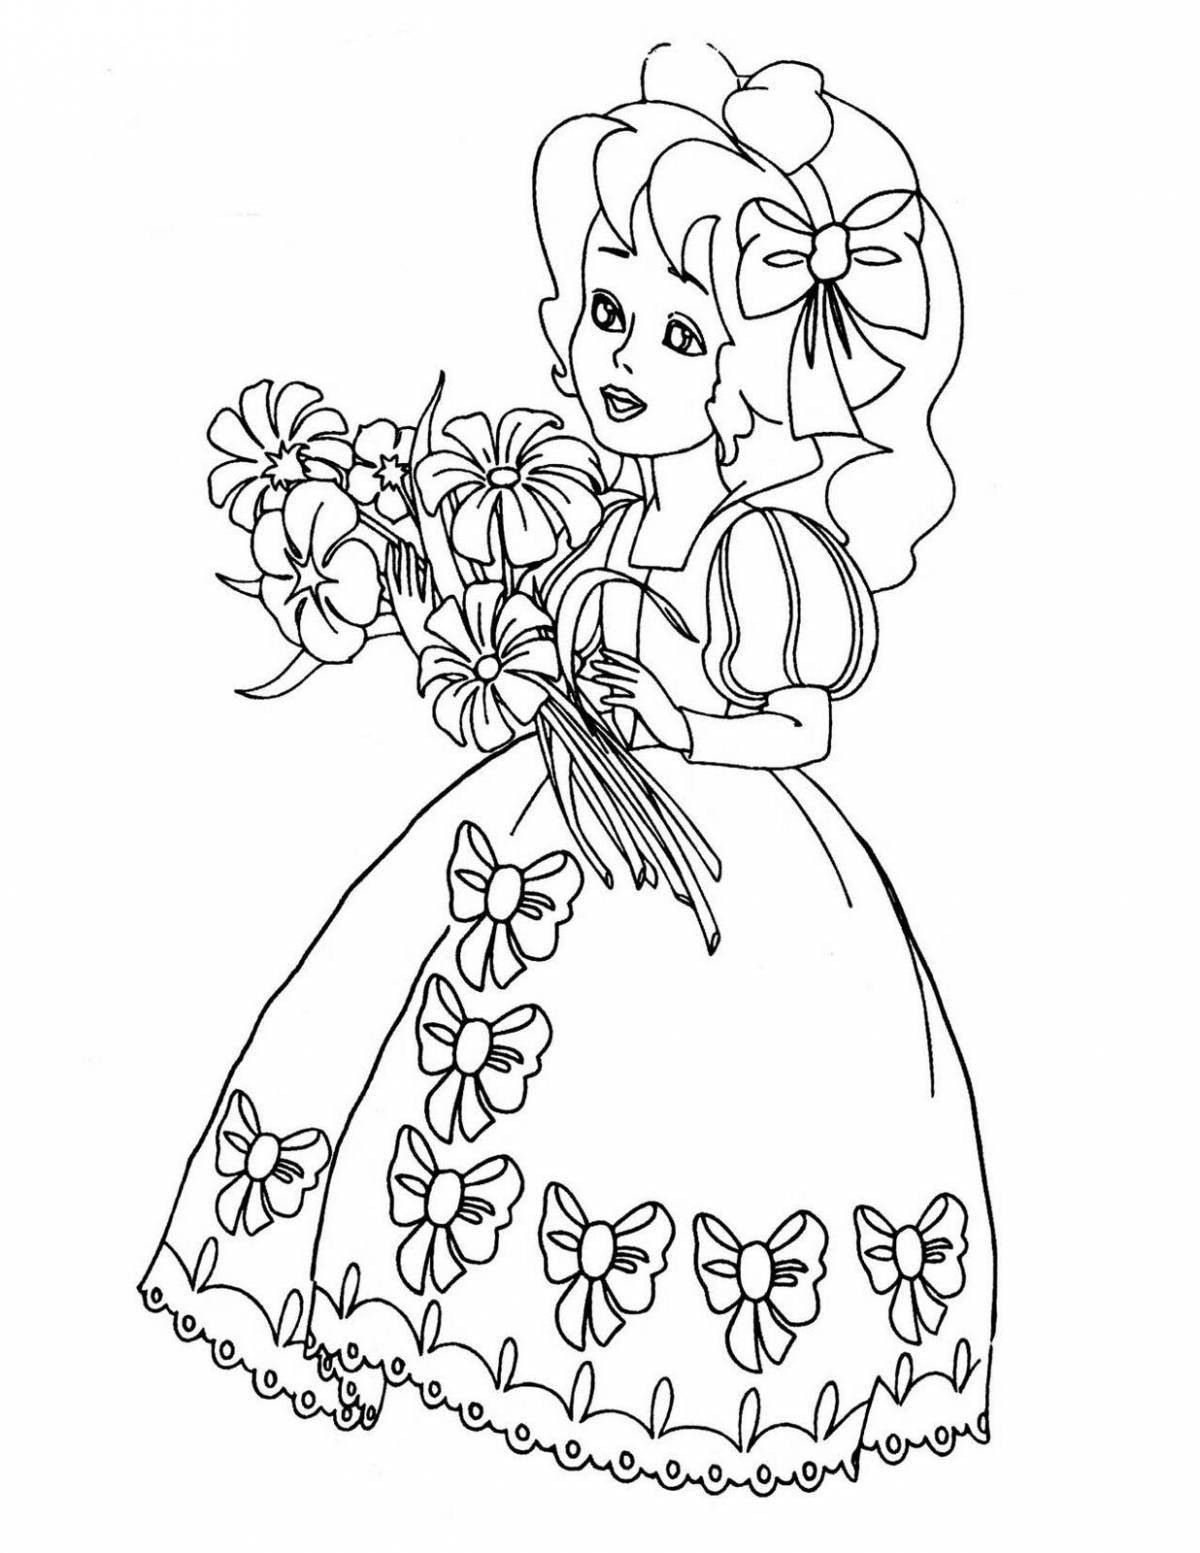 Radiant coloring page story for girls